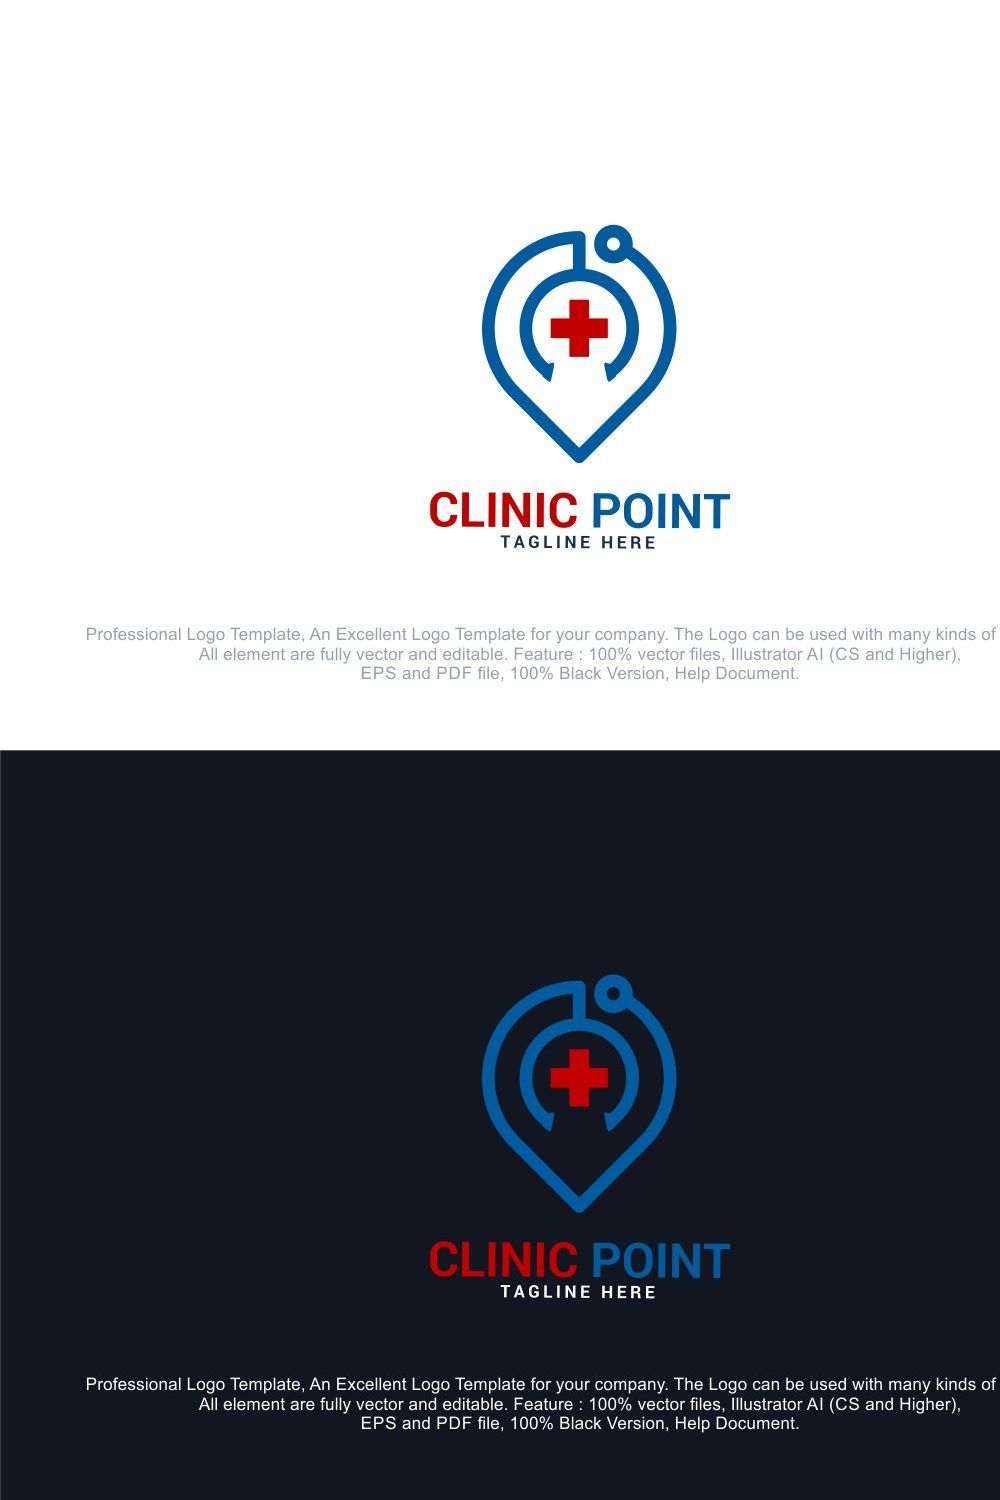 Local Clinic - Health Pin Logo pinterest preview image.